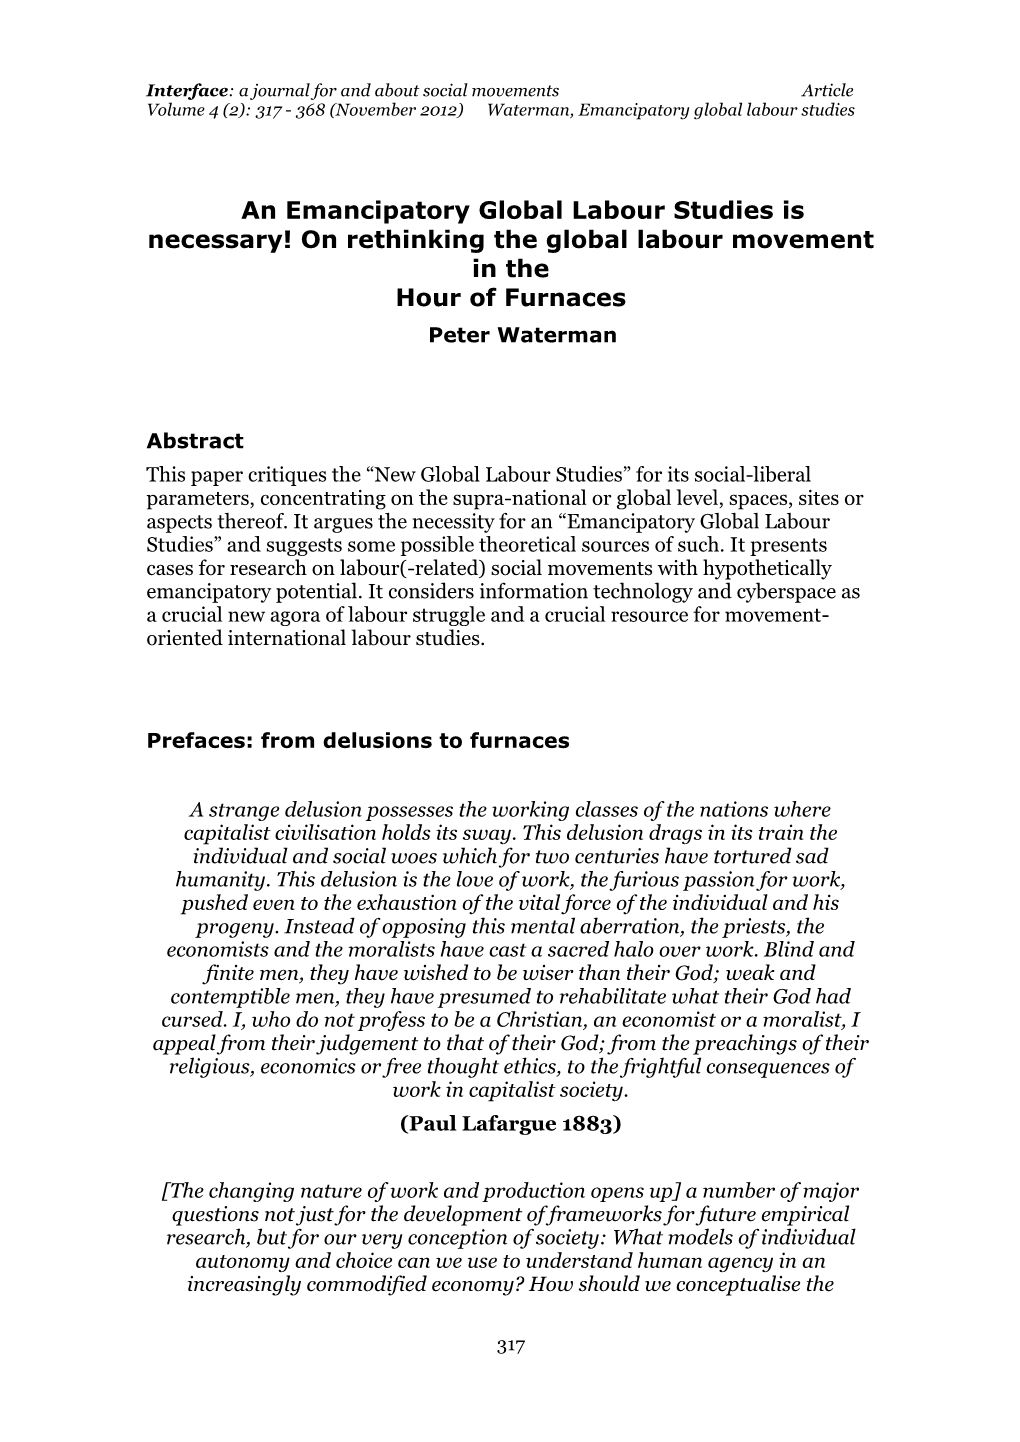 An Emancipatory Global Labour Studies Is Necessary! on Rethinking the Global Labour Movement in the Hour of Furnaces Peter Waterman